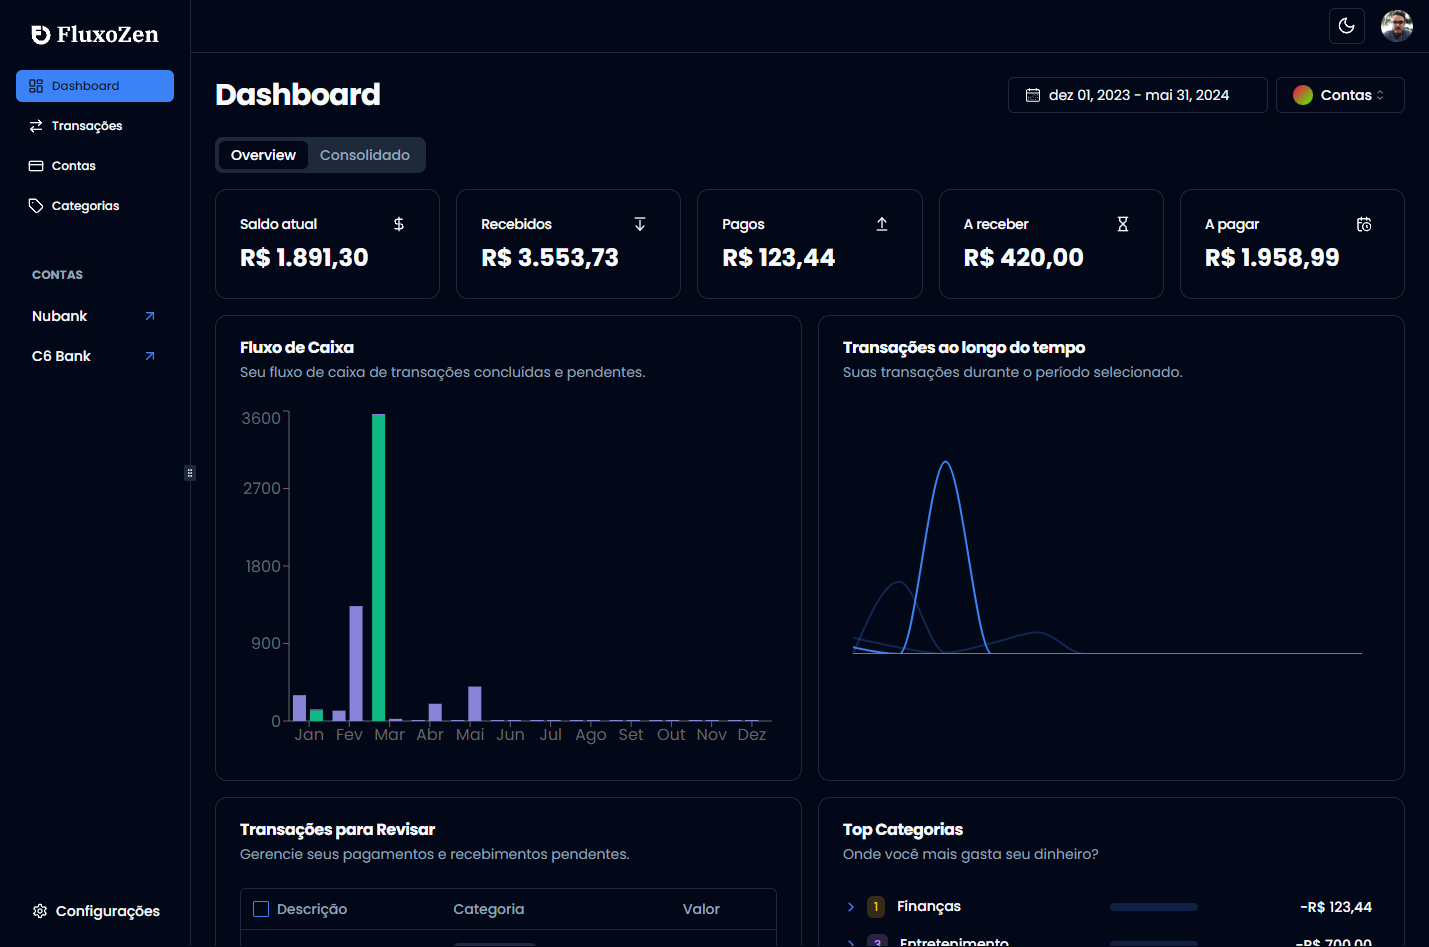 Dashboard - Overview